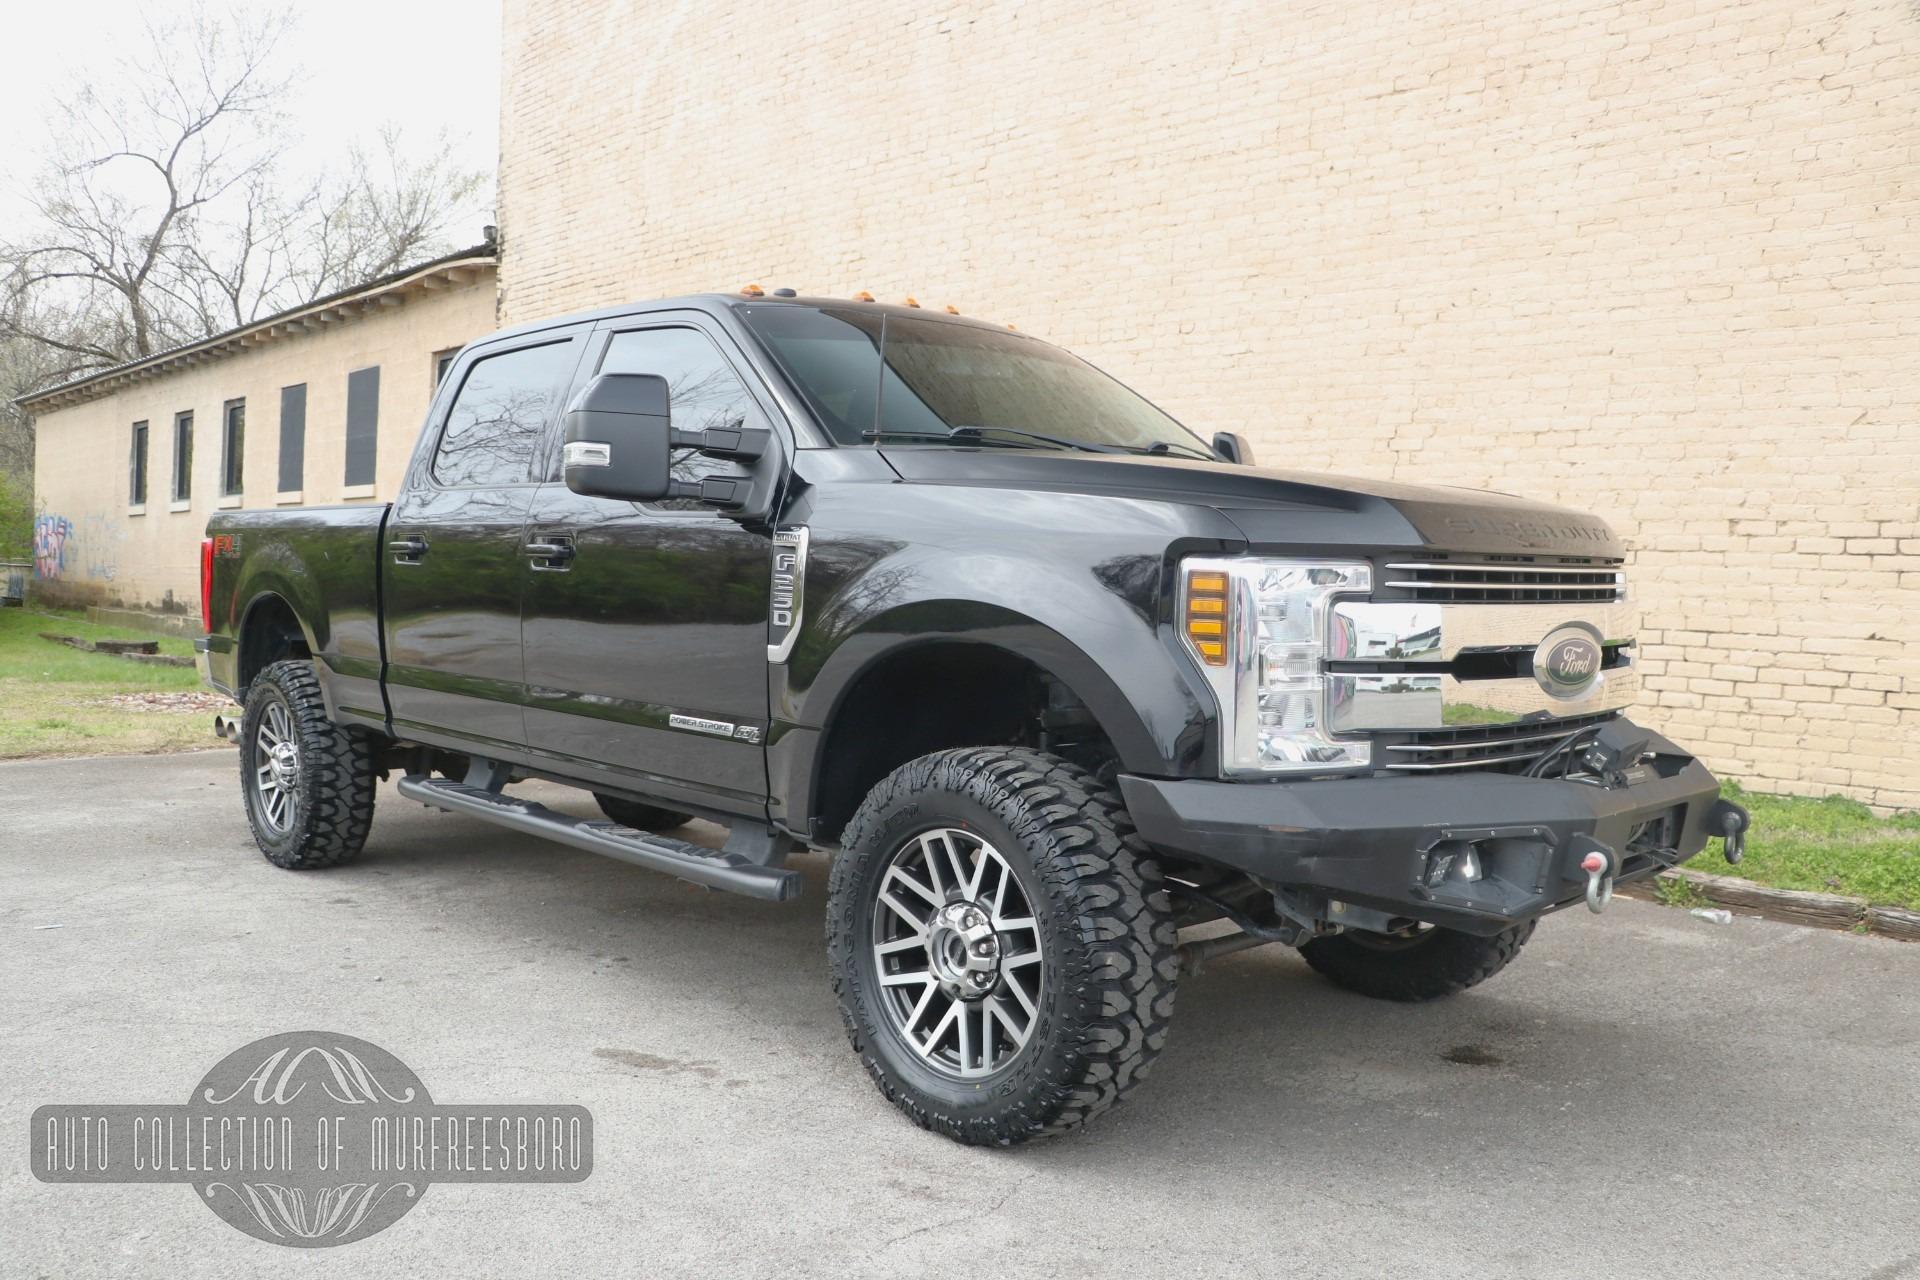 Used 2018 Ford F-250 Super Duty LARIAT 6.7L POWER STROKE DIESEL 4WD W/FX4 PKG for sale Sold at Auto Collection in Murfreesboro TN 37129 1